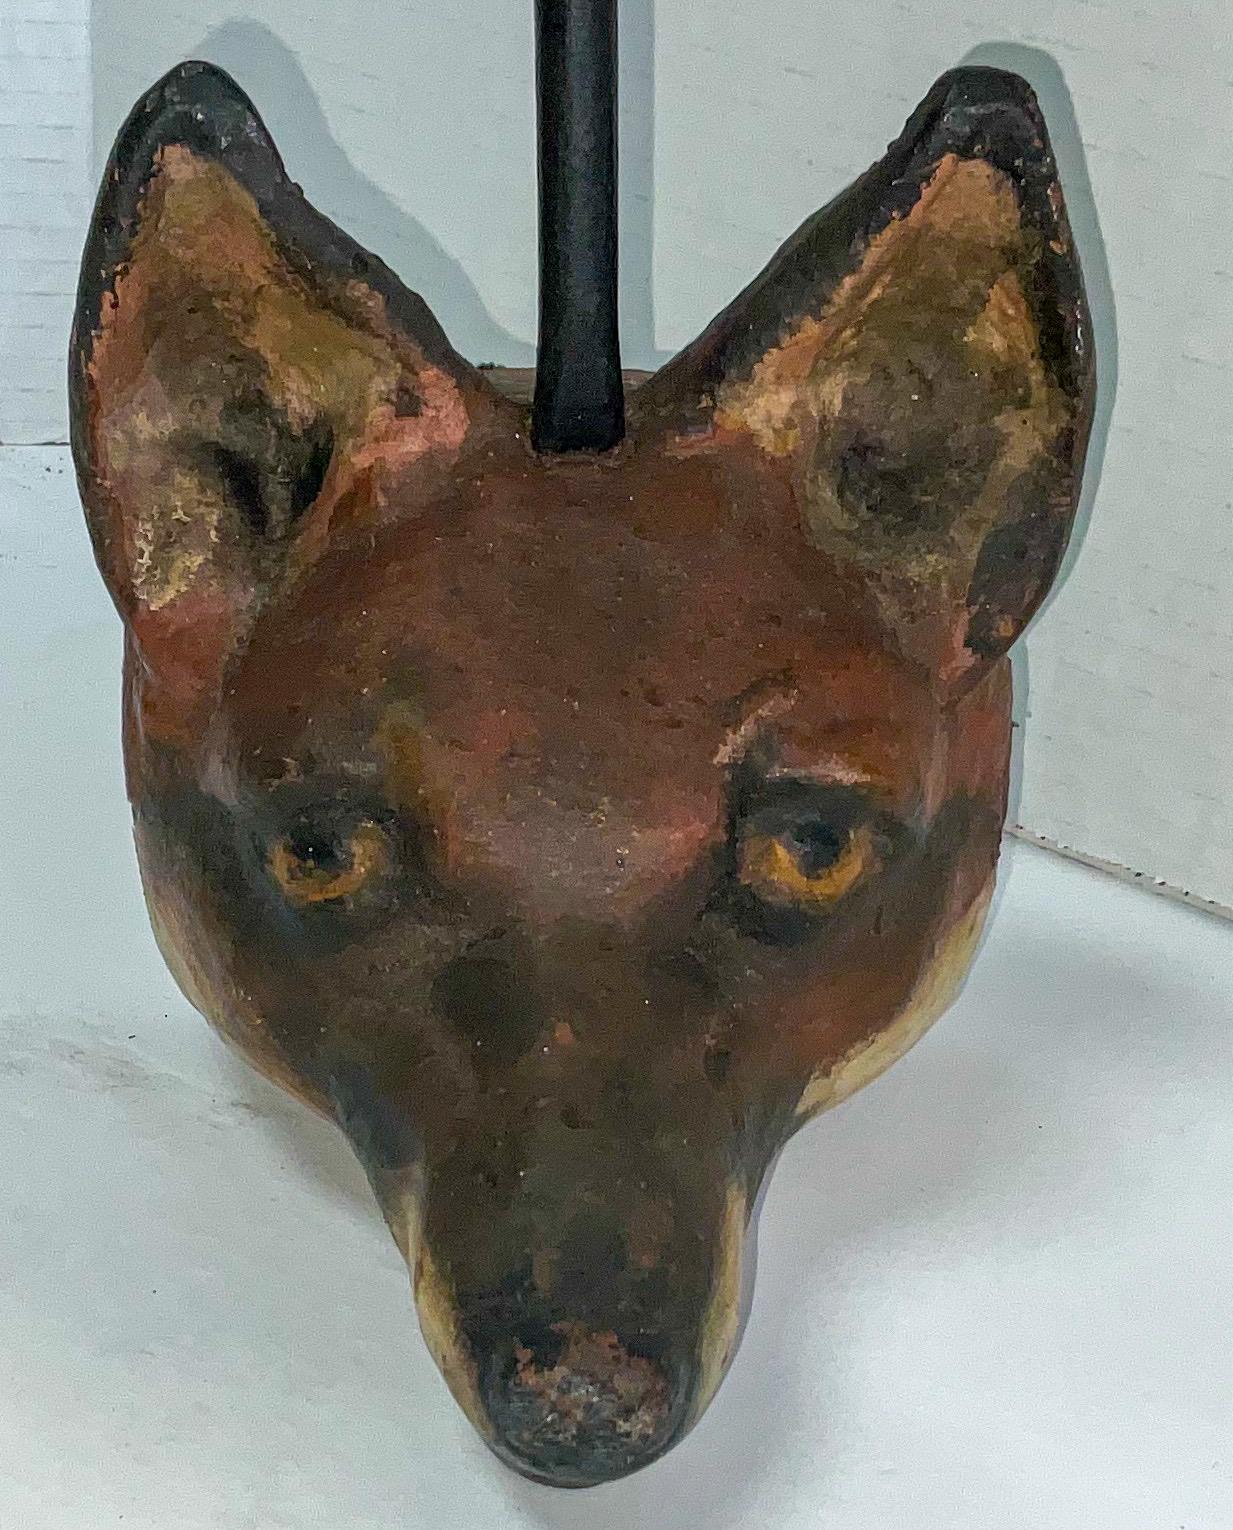 I have seen the brass version of this doorstop many times, but never the early cast iron version! It is a cast iron fox from painted doorstop in very good antique condition. It captures the hunt and hound theme perfectly!